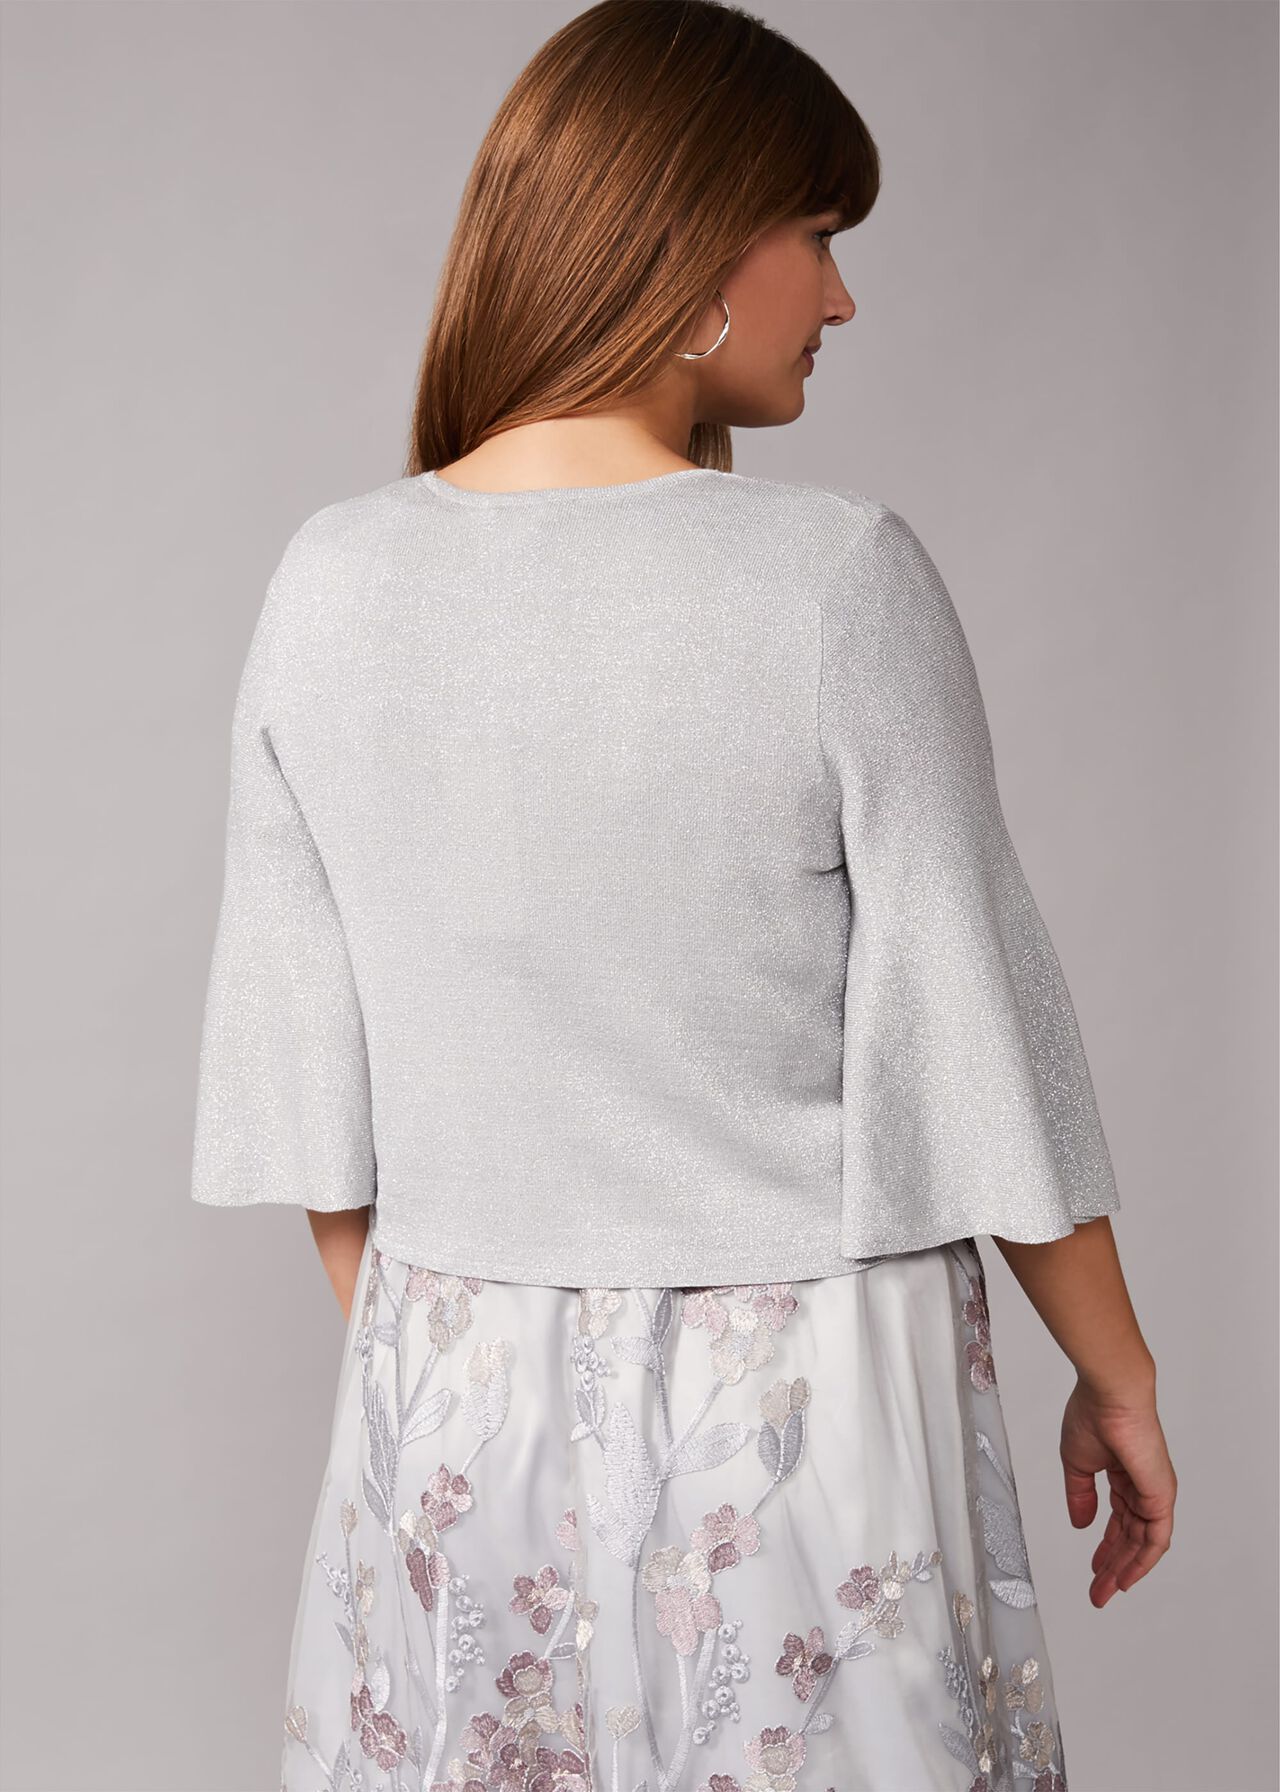 Tonie Shimmer Knitted Cover Up